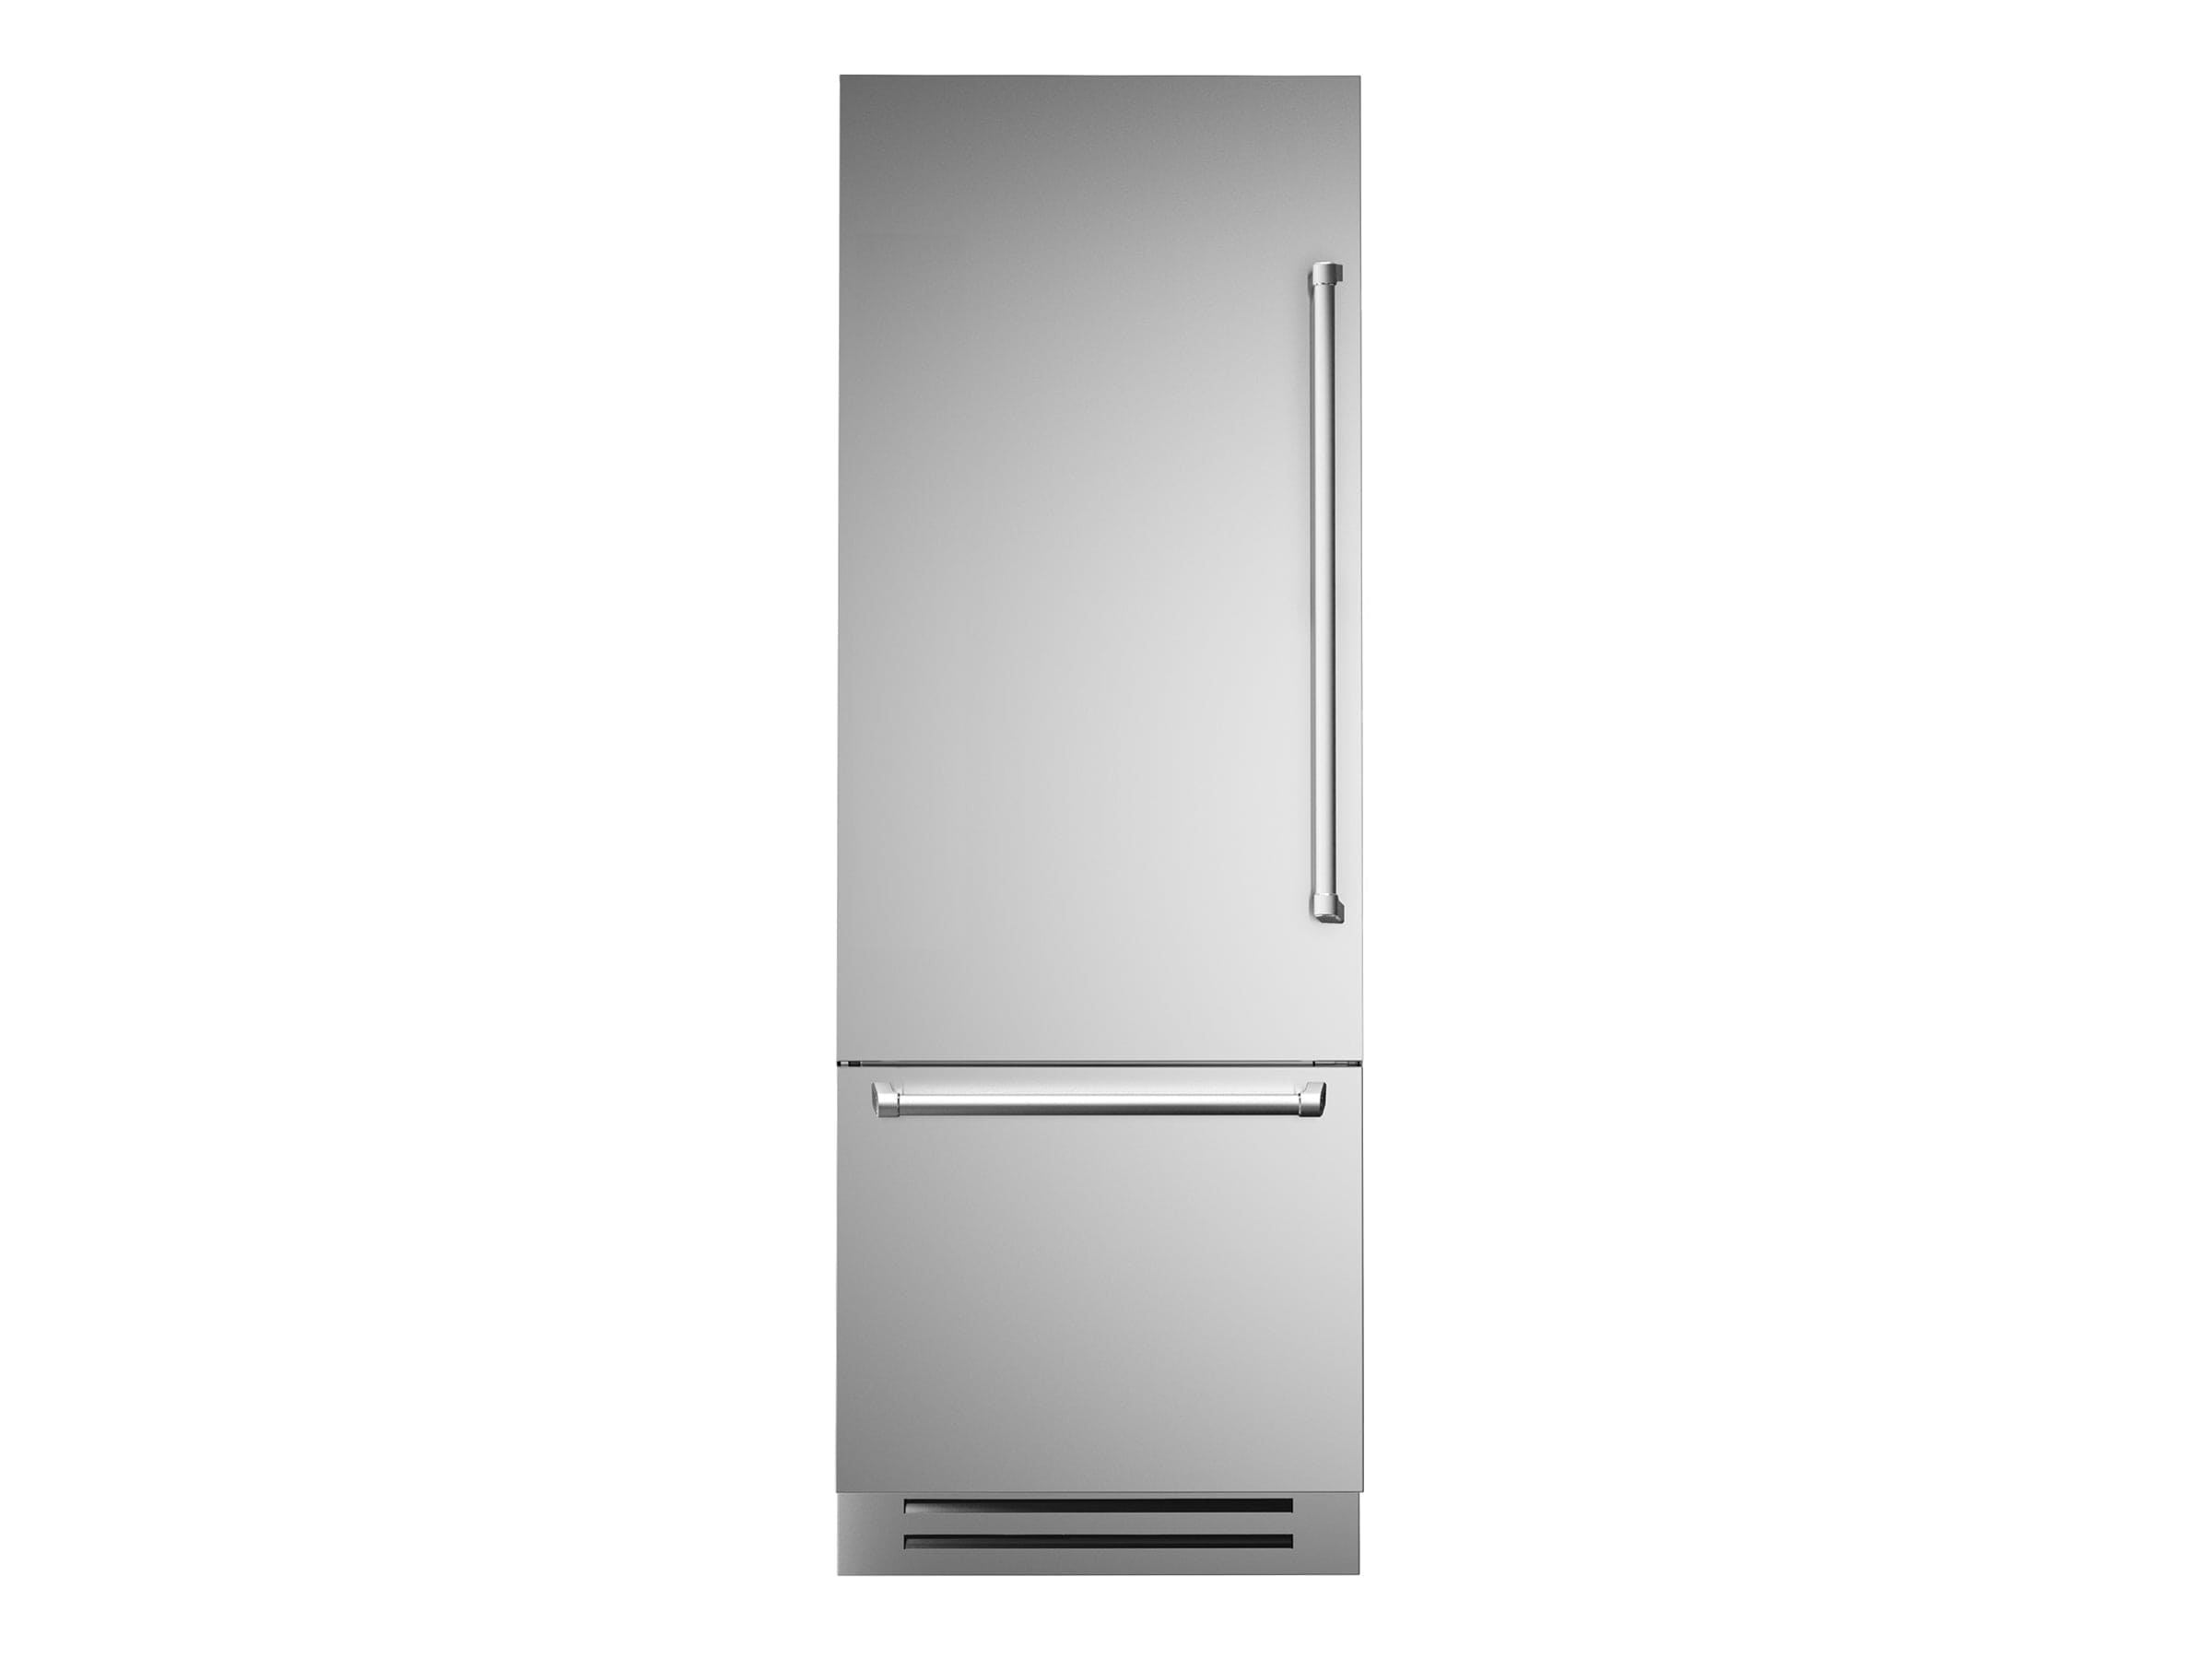 Bertazzoni 30" 15.5 Cu.Ft. Stainless Steel Built-In Bottom Mount Refrigerator With Ice Maker and Left Swing Door REF30BMBIXLT Luxury Appliances Direct